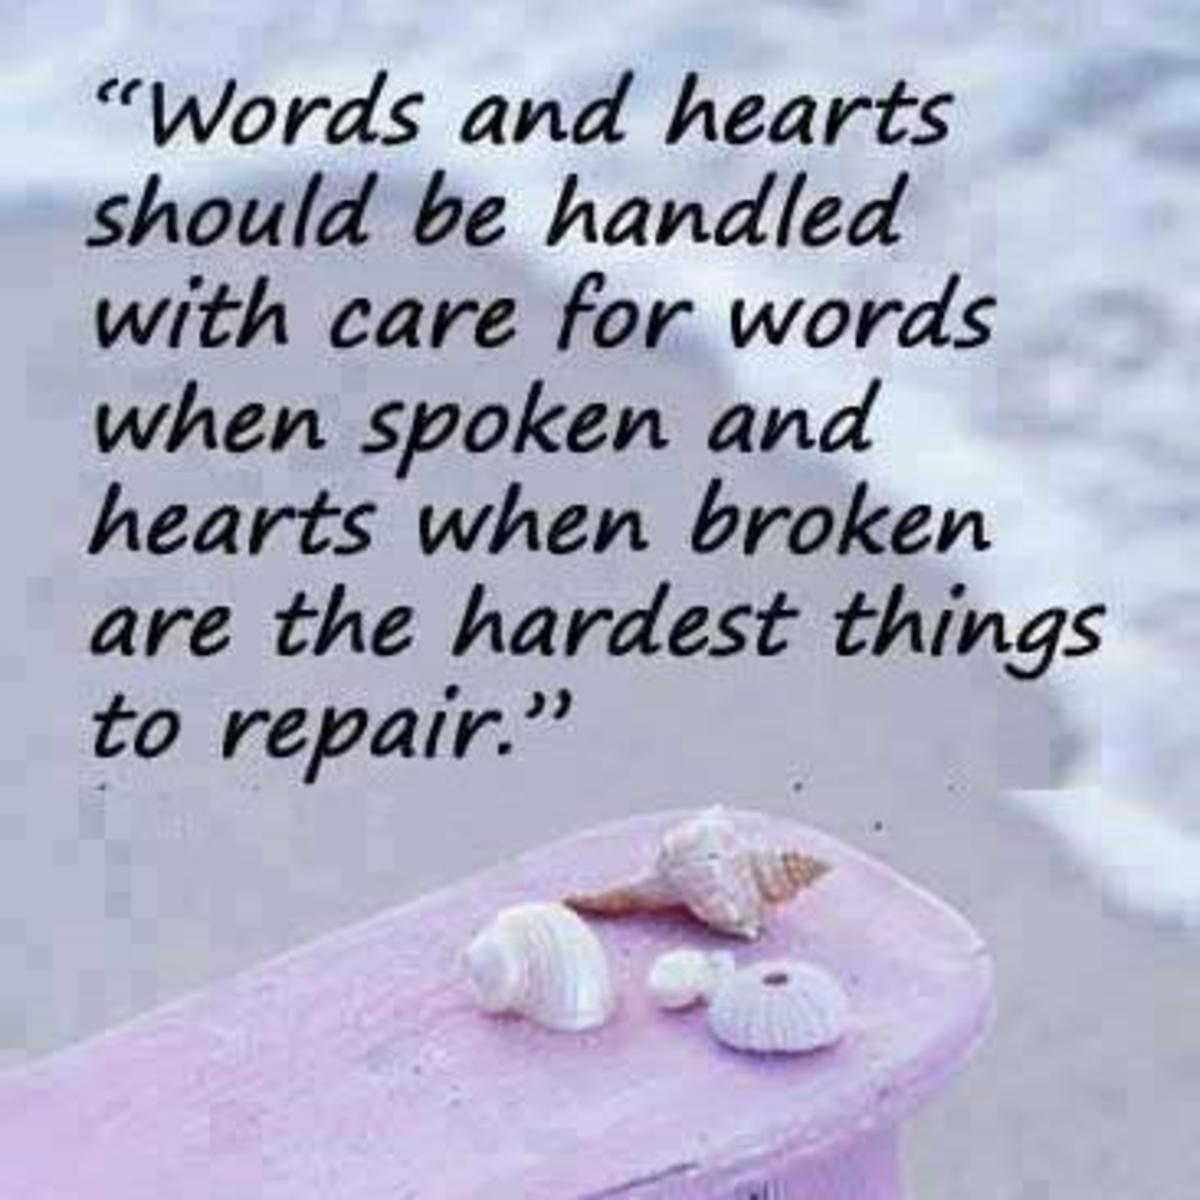 Quotes about hurtful words from someone you love